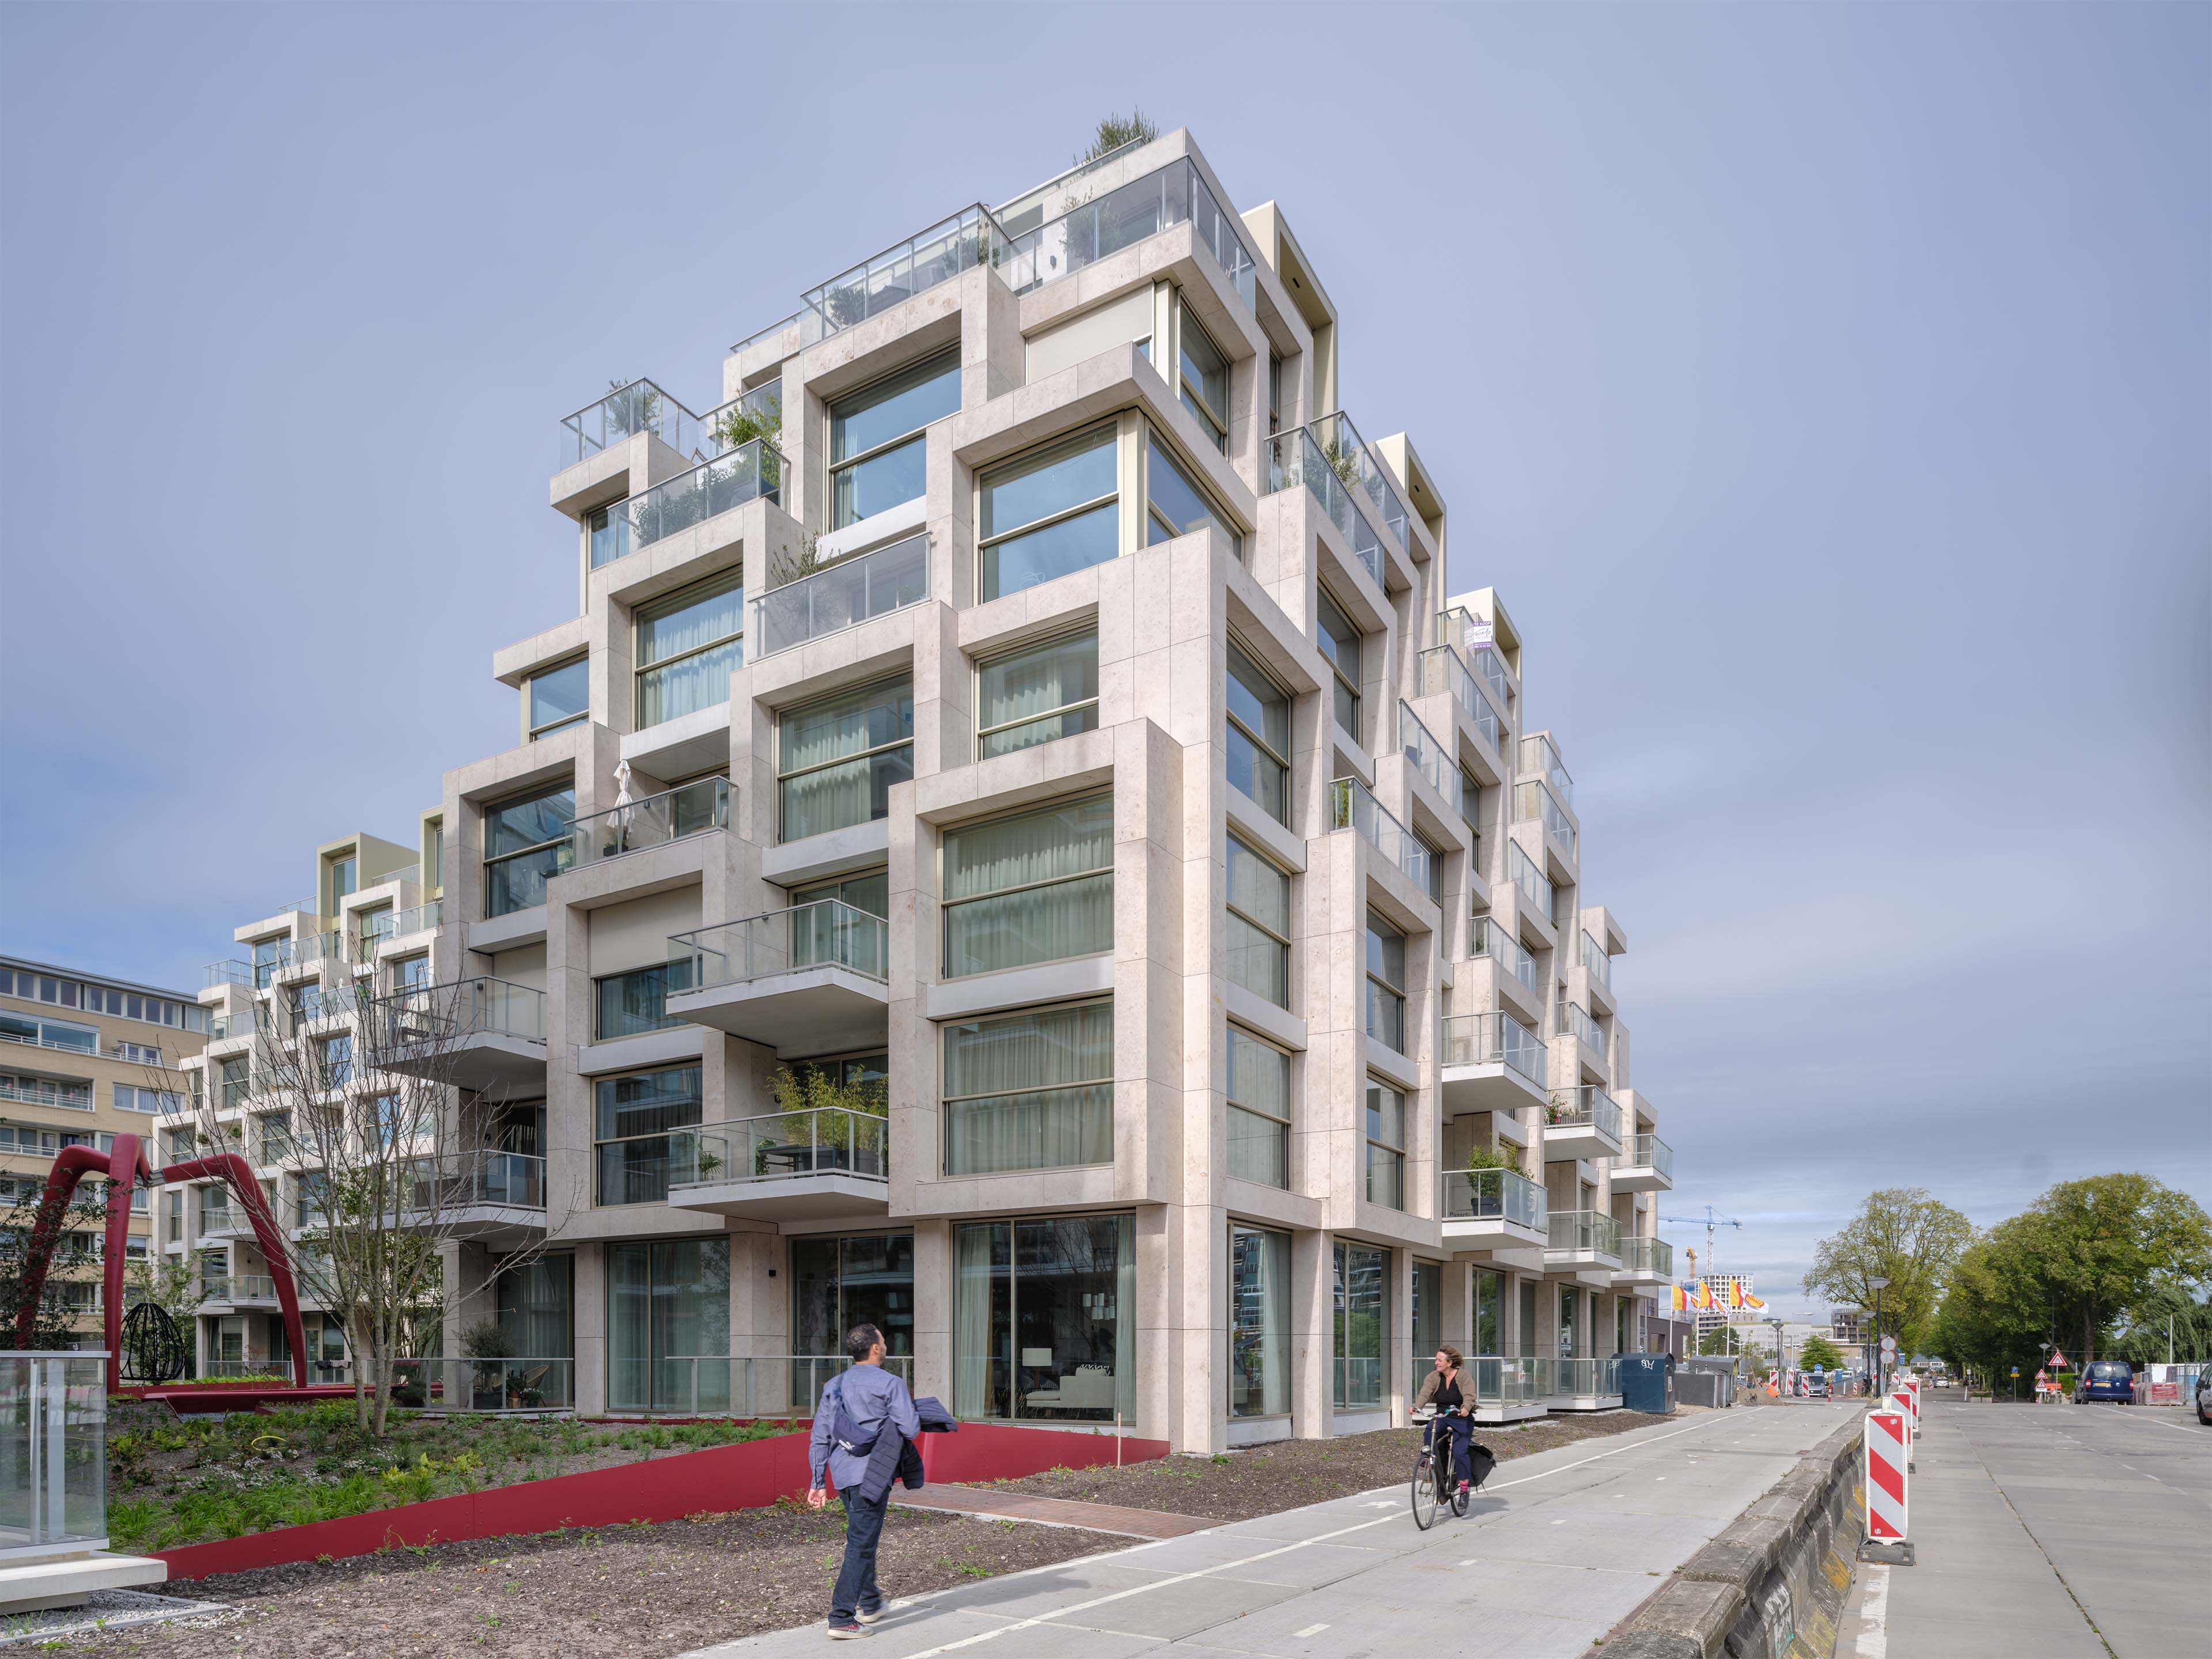  KCAP completes The Grid in Amsterdam, a building made of balconies